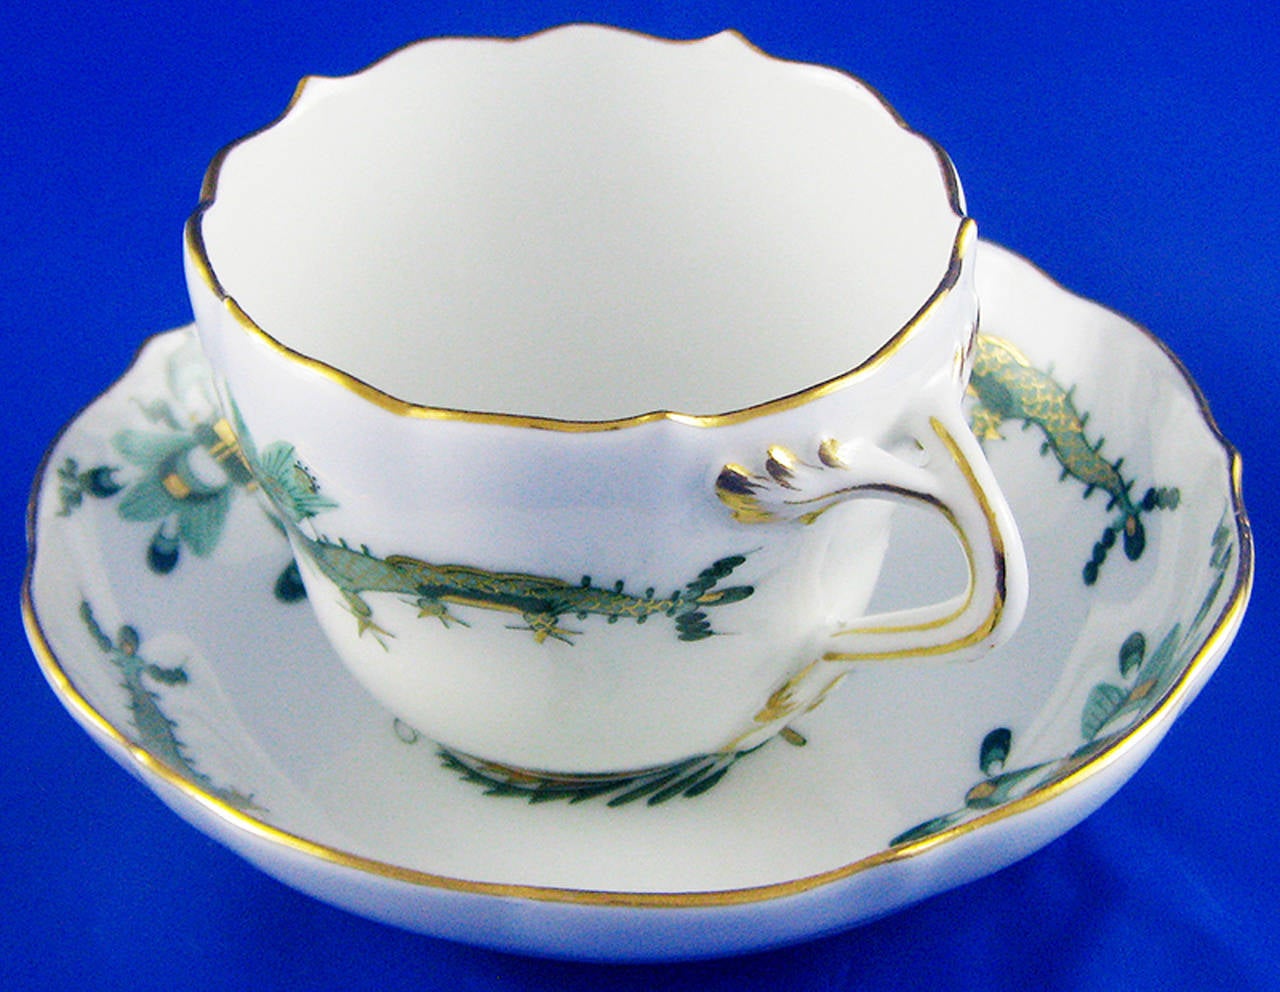 A cup of 'Green Dragon' 'Meissen 
Signature used in the years 1850-1924.
in perfect condition.

Size:
cup:
-height: 5.1cm
-diameter: 6,6cm

saucer
-diameter: 10,8cm